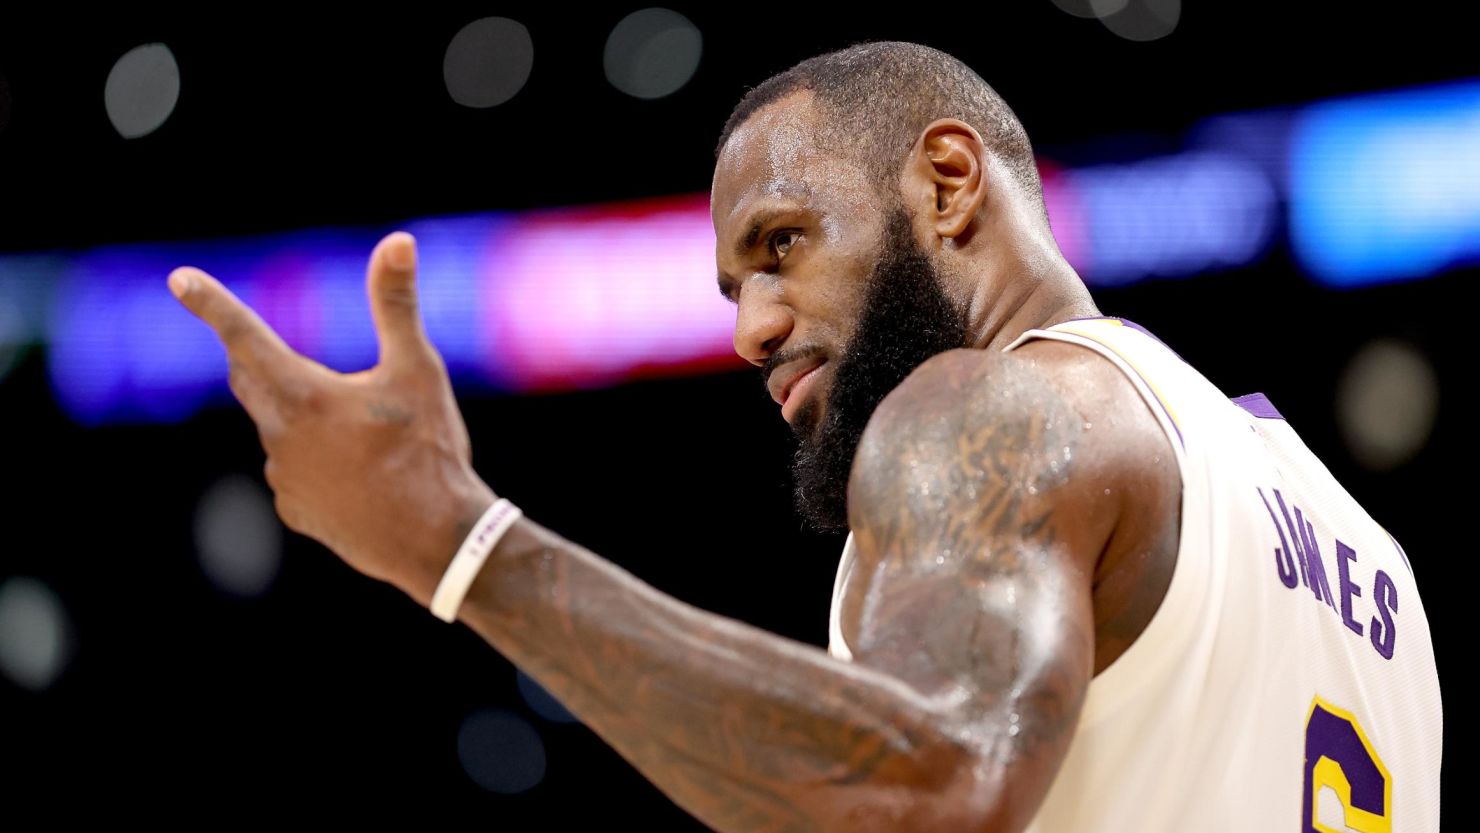 LeBron James Makes History As First NBA Player To Score 40,000 Points